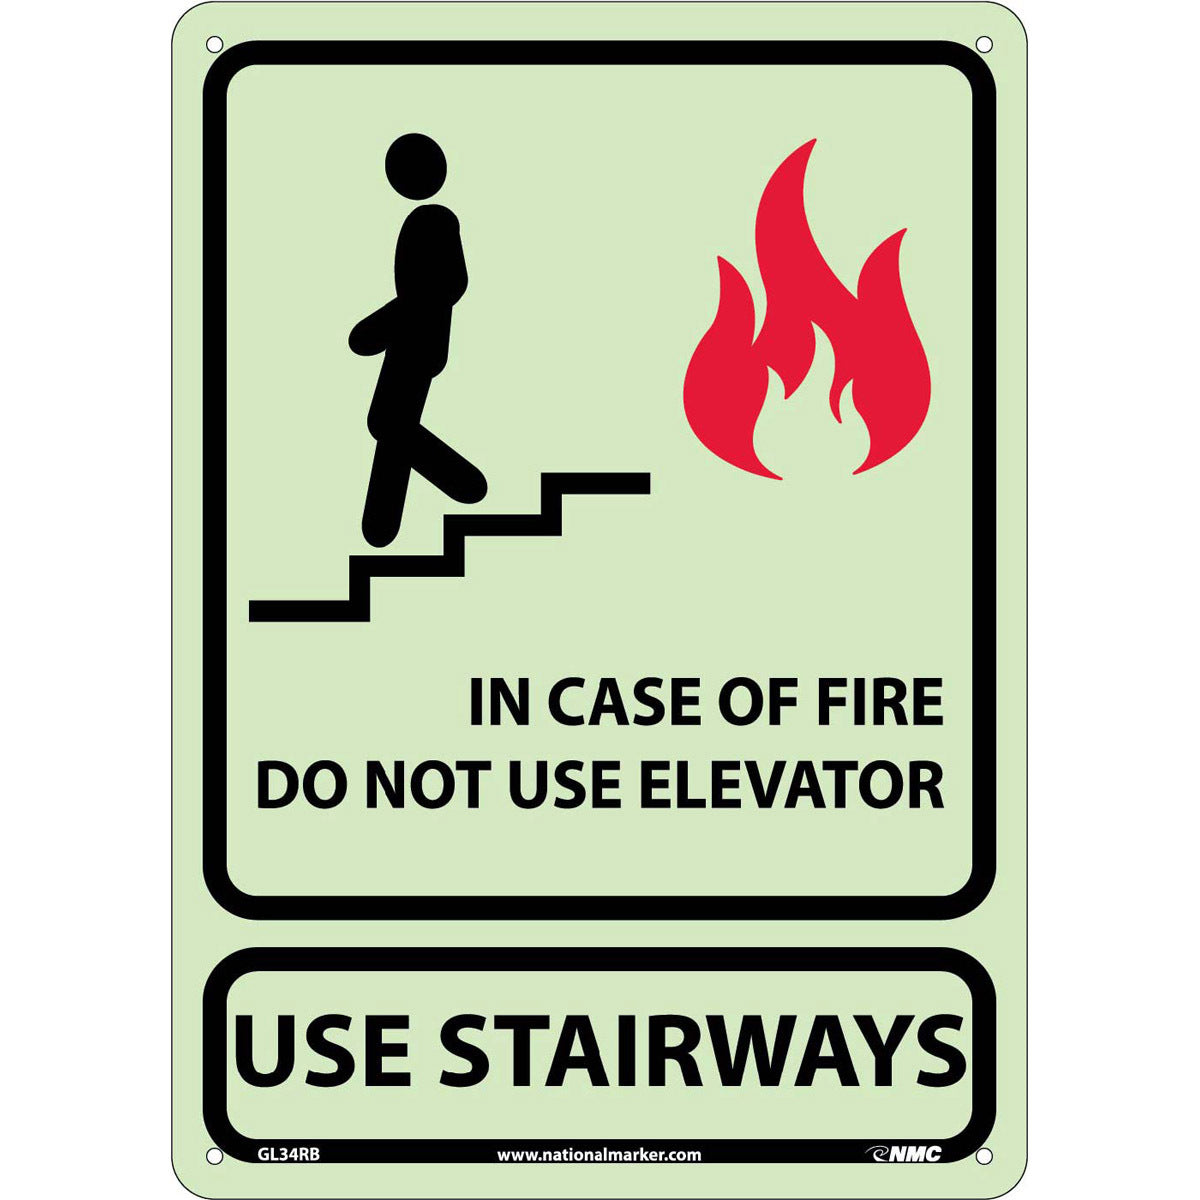 NM 14" X 10" White .05" Rigid Plastic Fire Safety Sign "IN CASE OF FIRE DO NOT USE ELEVATOR USE STAIRWAYS"